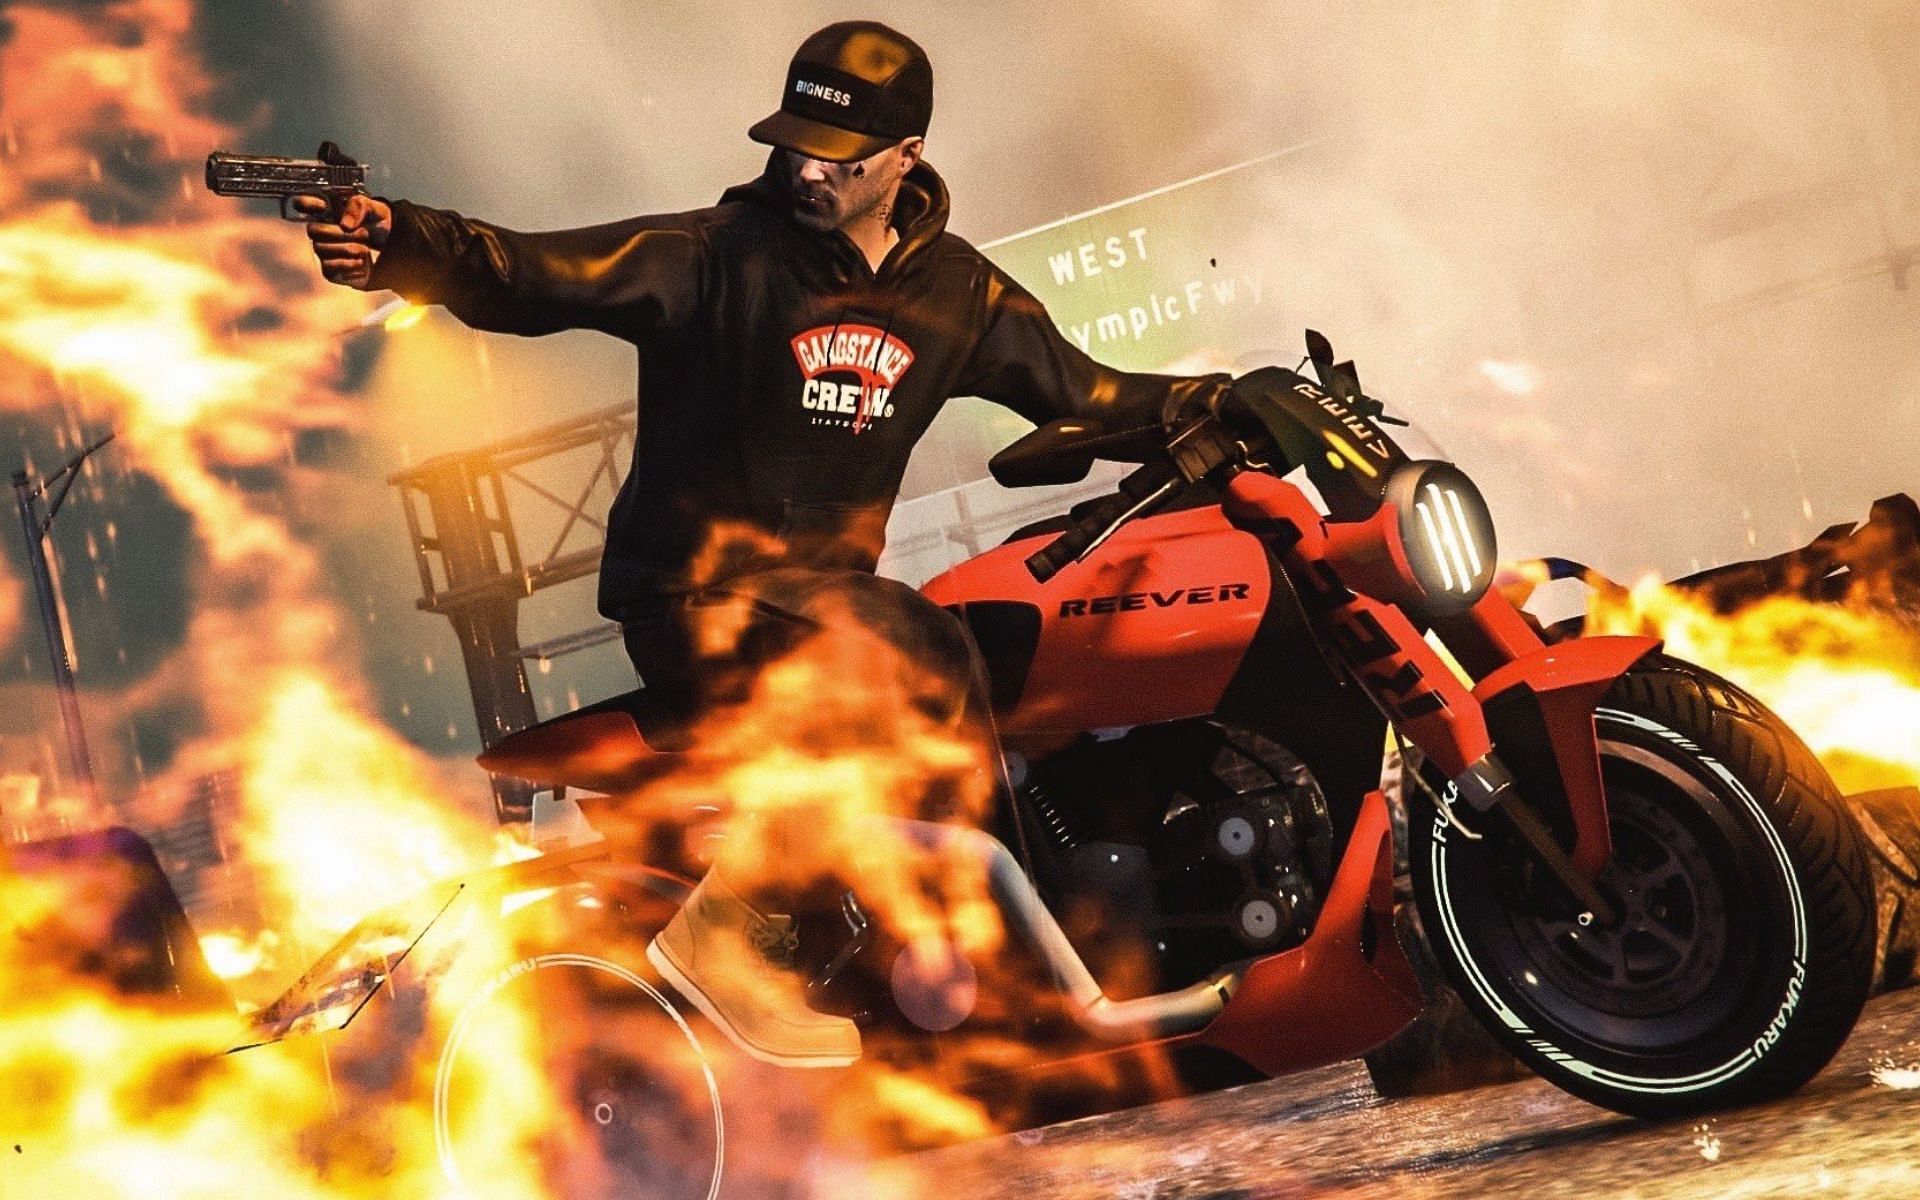 The newest motorcycle in GTA Online is insanely fast (Image via @basi_jp)